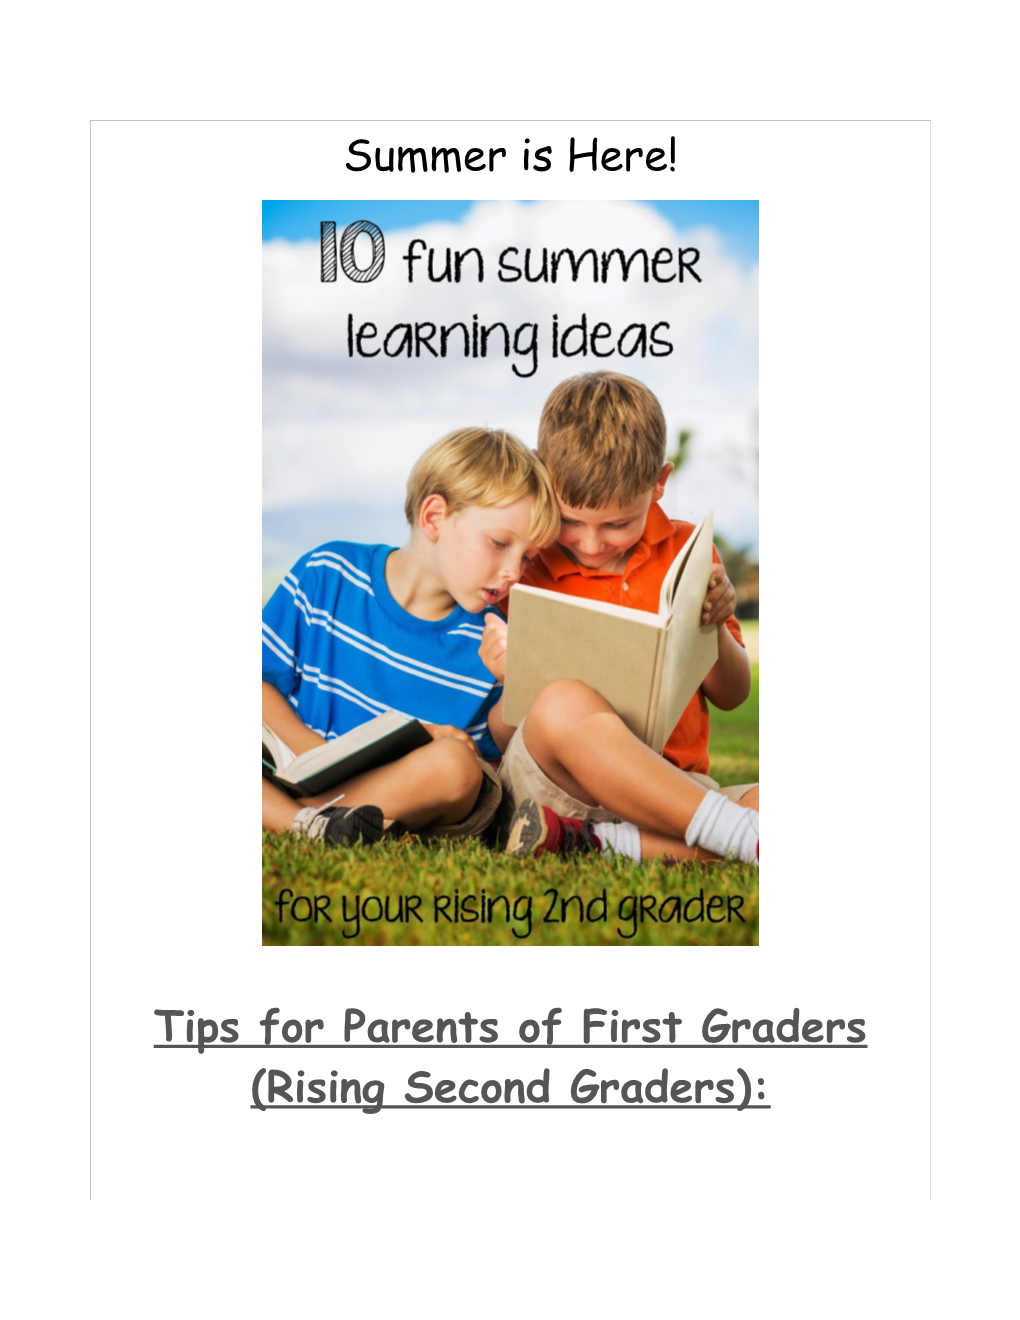 Tips for Parents of First Graders (Rising Second Graders)